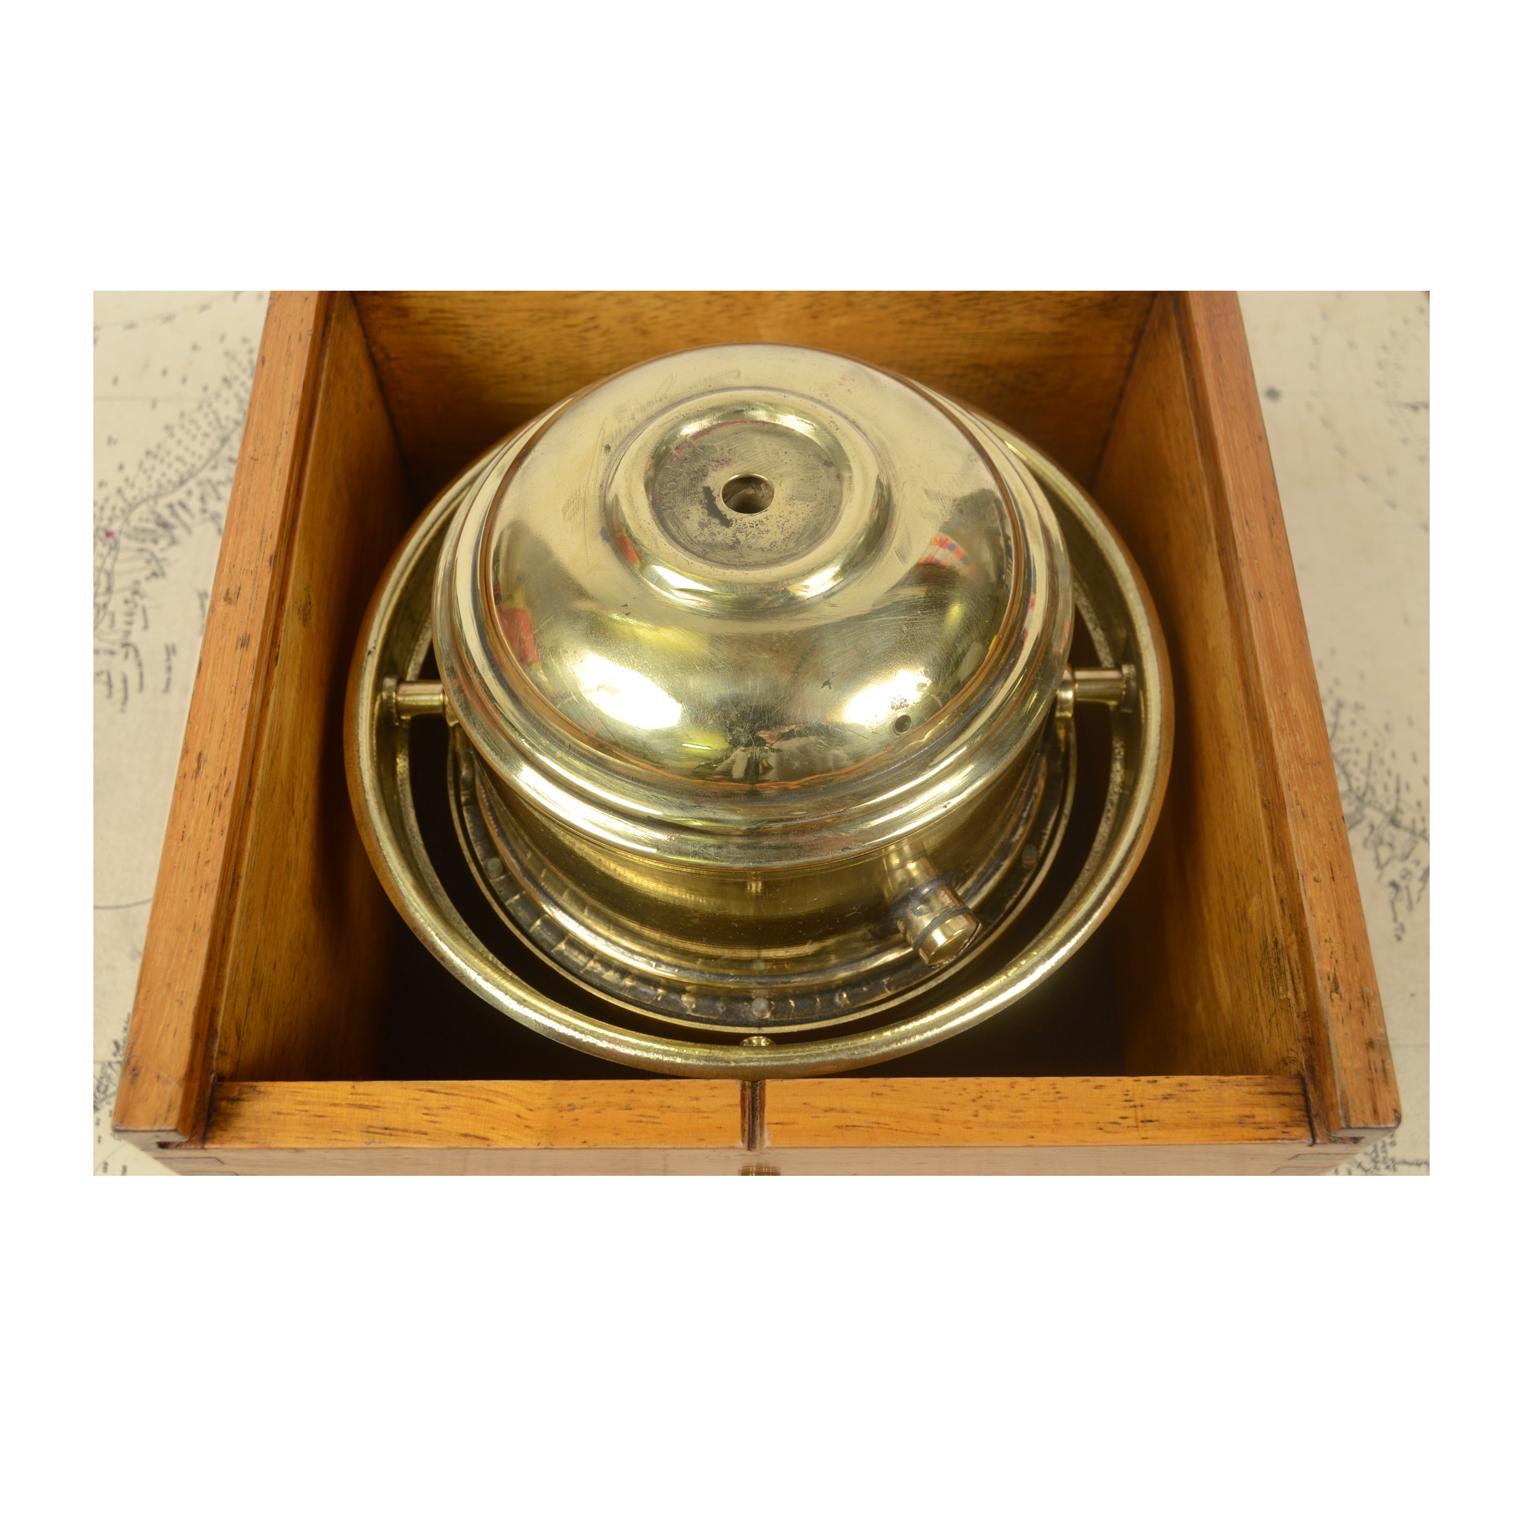 1900s Sestrel  Antique Nautical Magnetic Compass in its Original Wooden Box    4